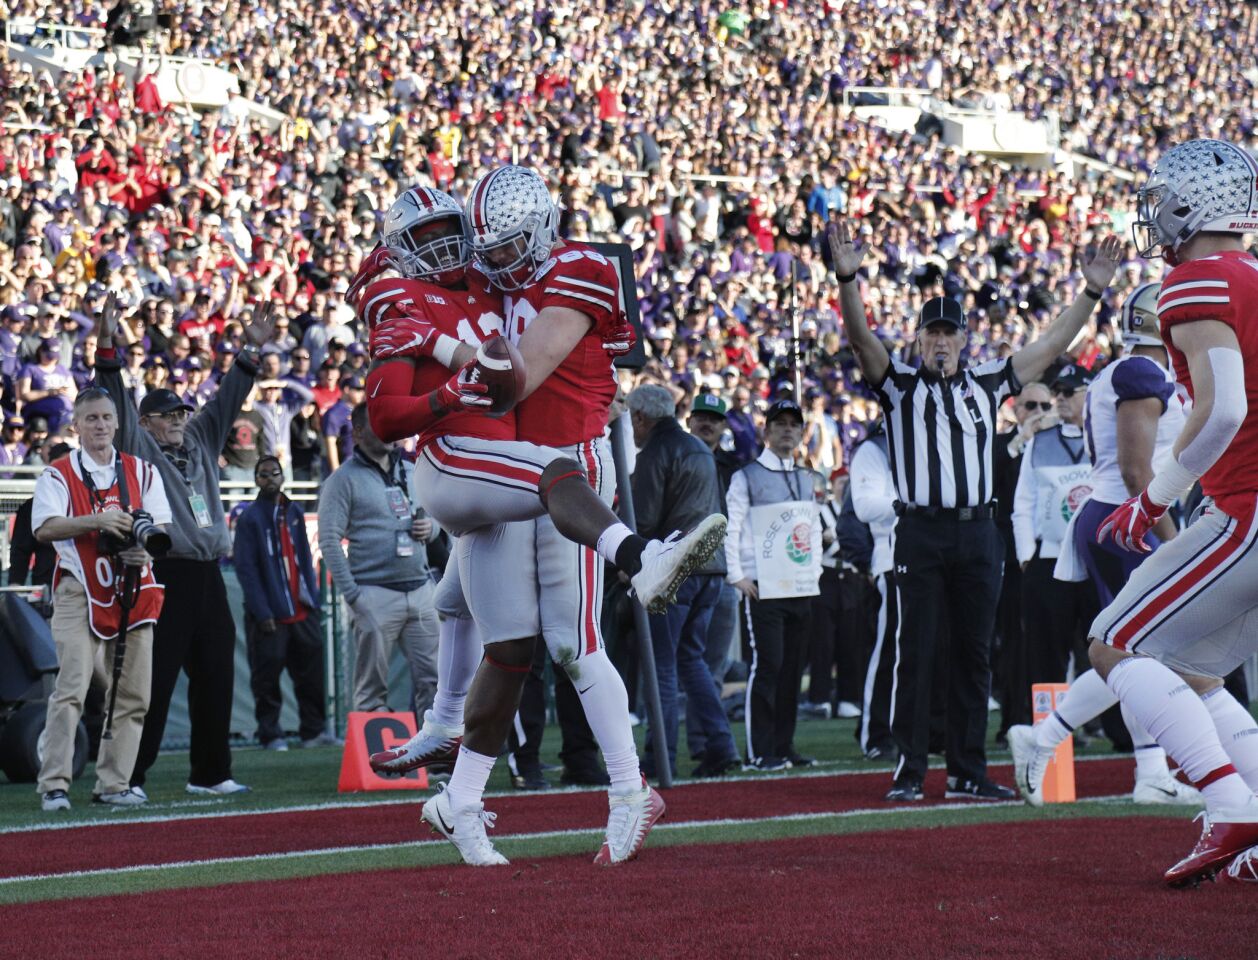 Ohio State tight end Rashod Berry (13) celebrates his touchdown with tight end Luke Farrell (89) against Washington late in the second quarter at the Rose Bowl on Jan. 1.